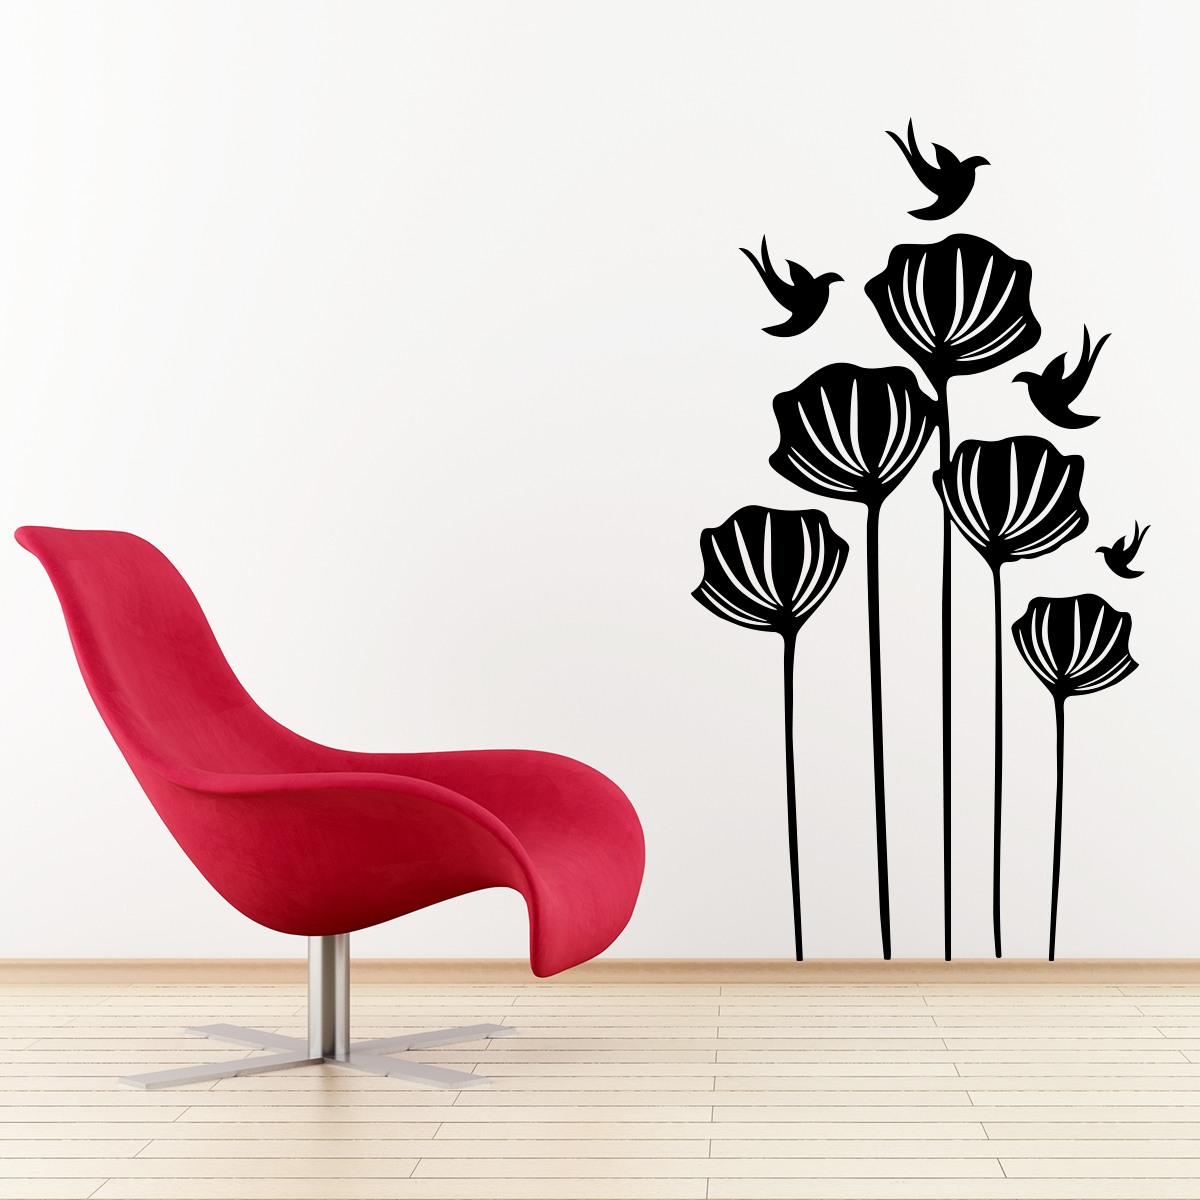 Wall sticker tropical flowers and dancers birds